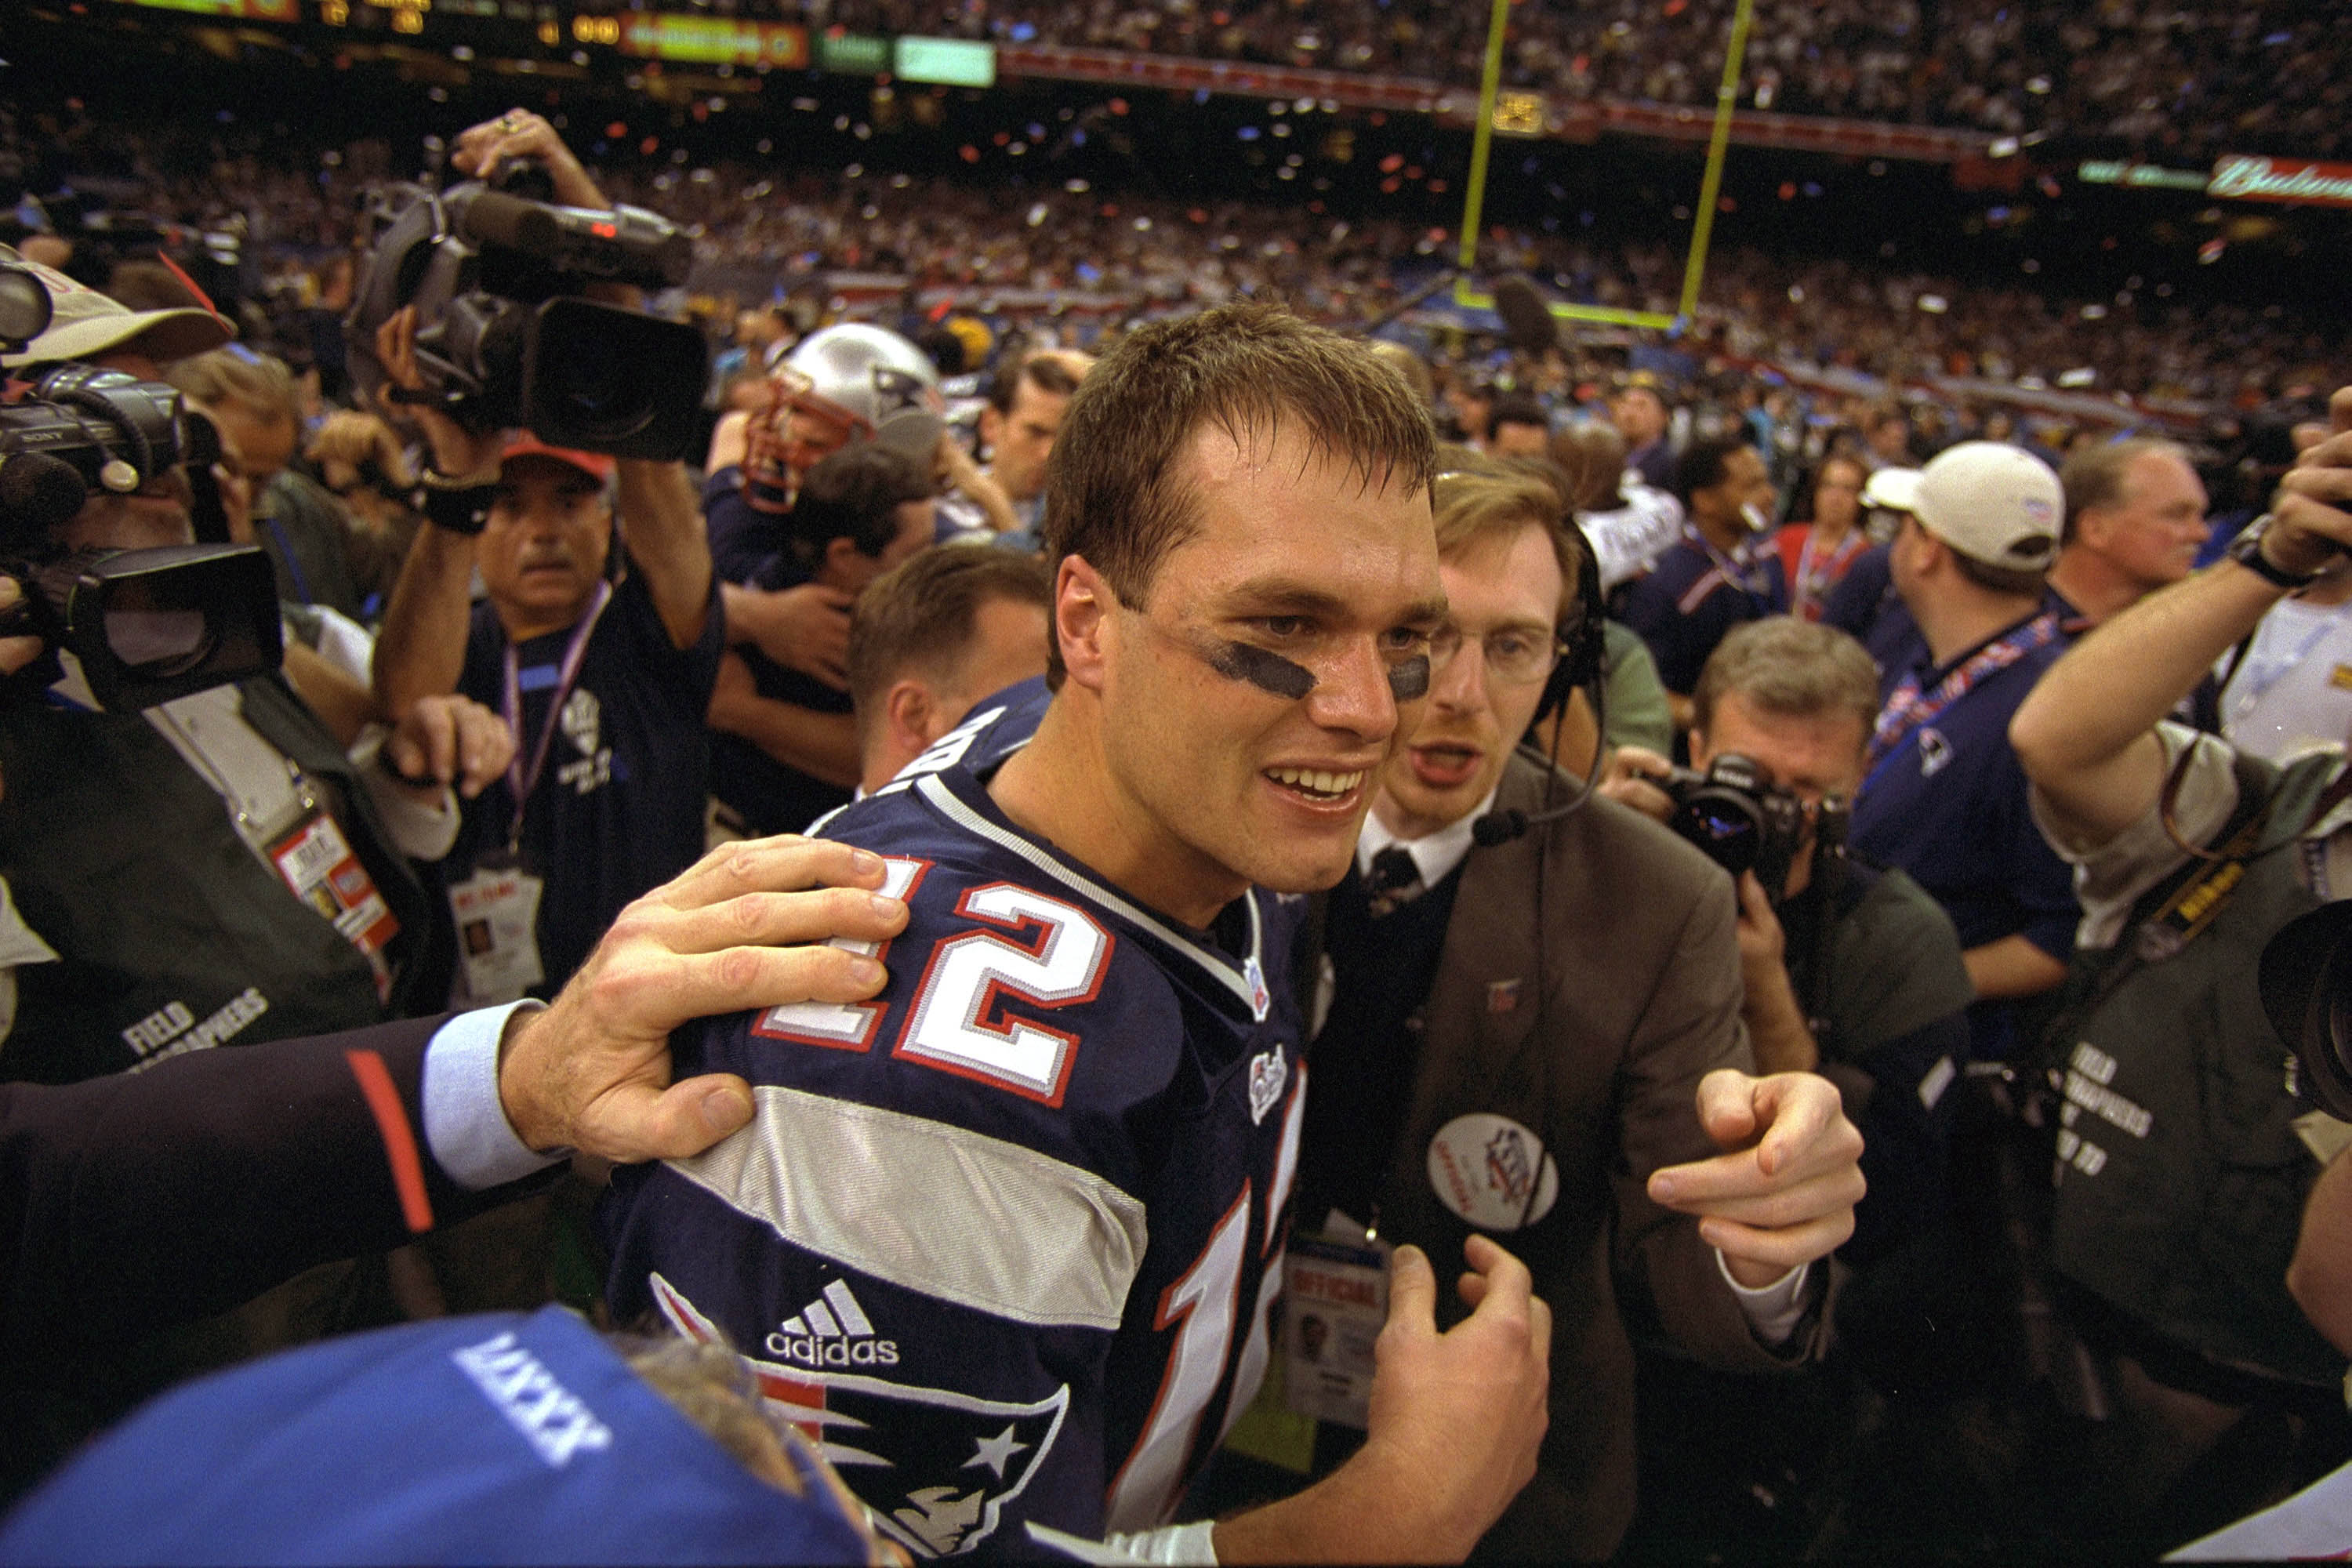 John Maddens call of Tom Brady's winning drive in Super Bowl 36 is iconic